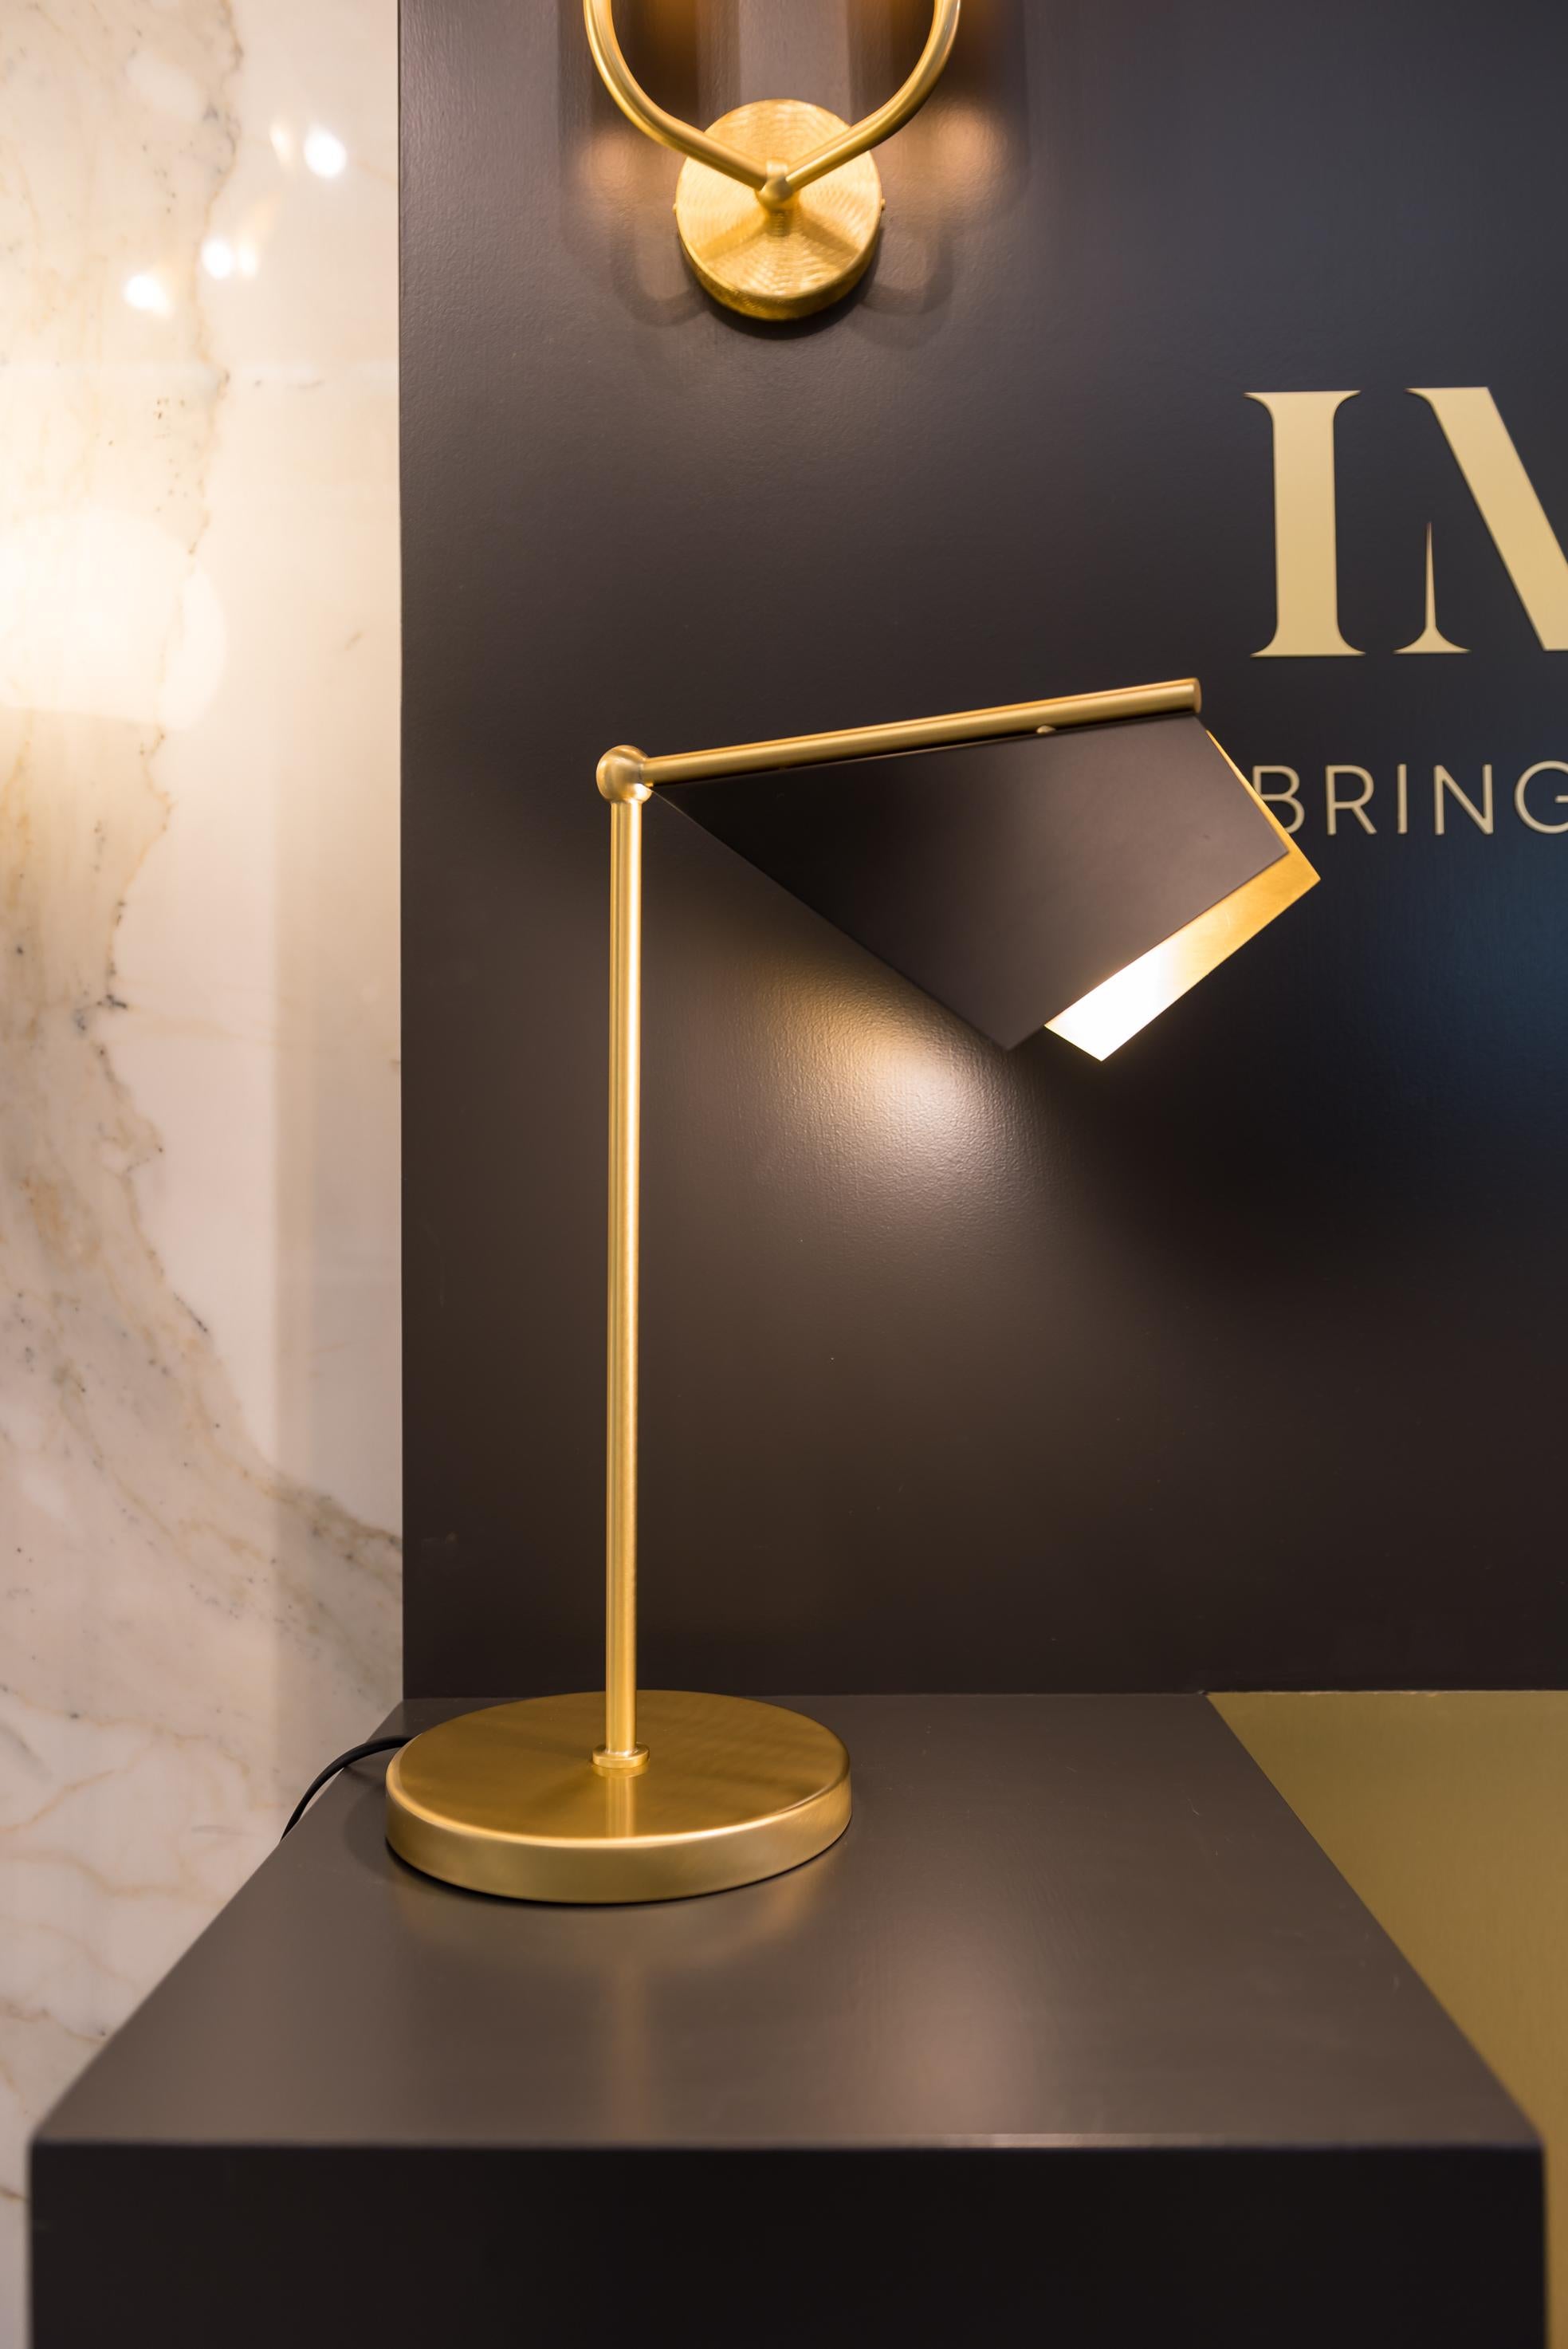 IMAGIN Vespertilio Table Lamp 1 in Matt Black and Brushed Brass In New Condition For Sale In Leighton Buzzard, GB